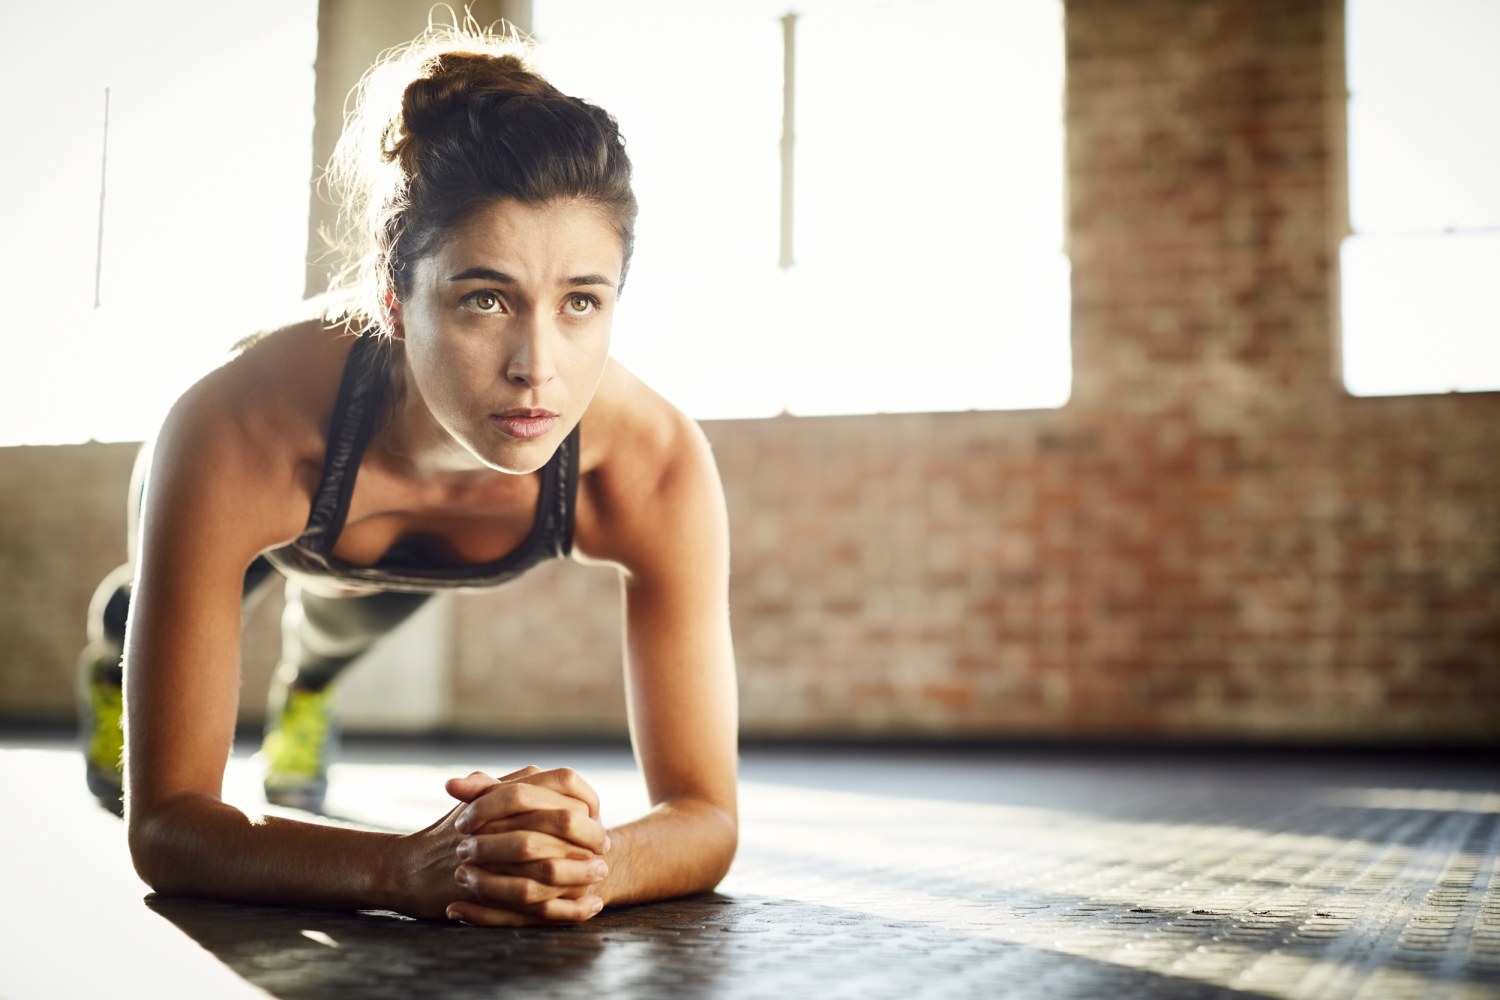 19 Workout Tips That Will Make Your Gym Sessions So Much More Effective